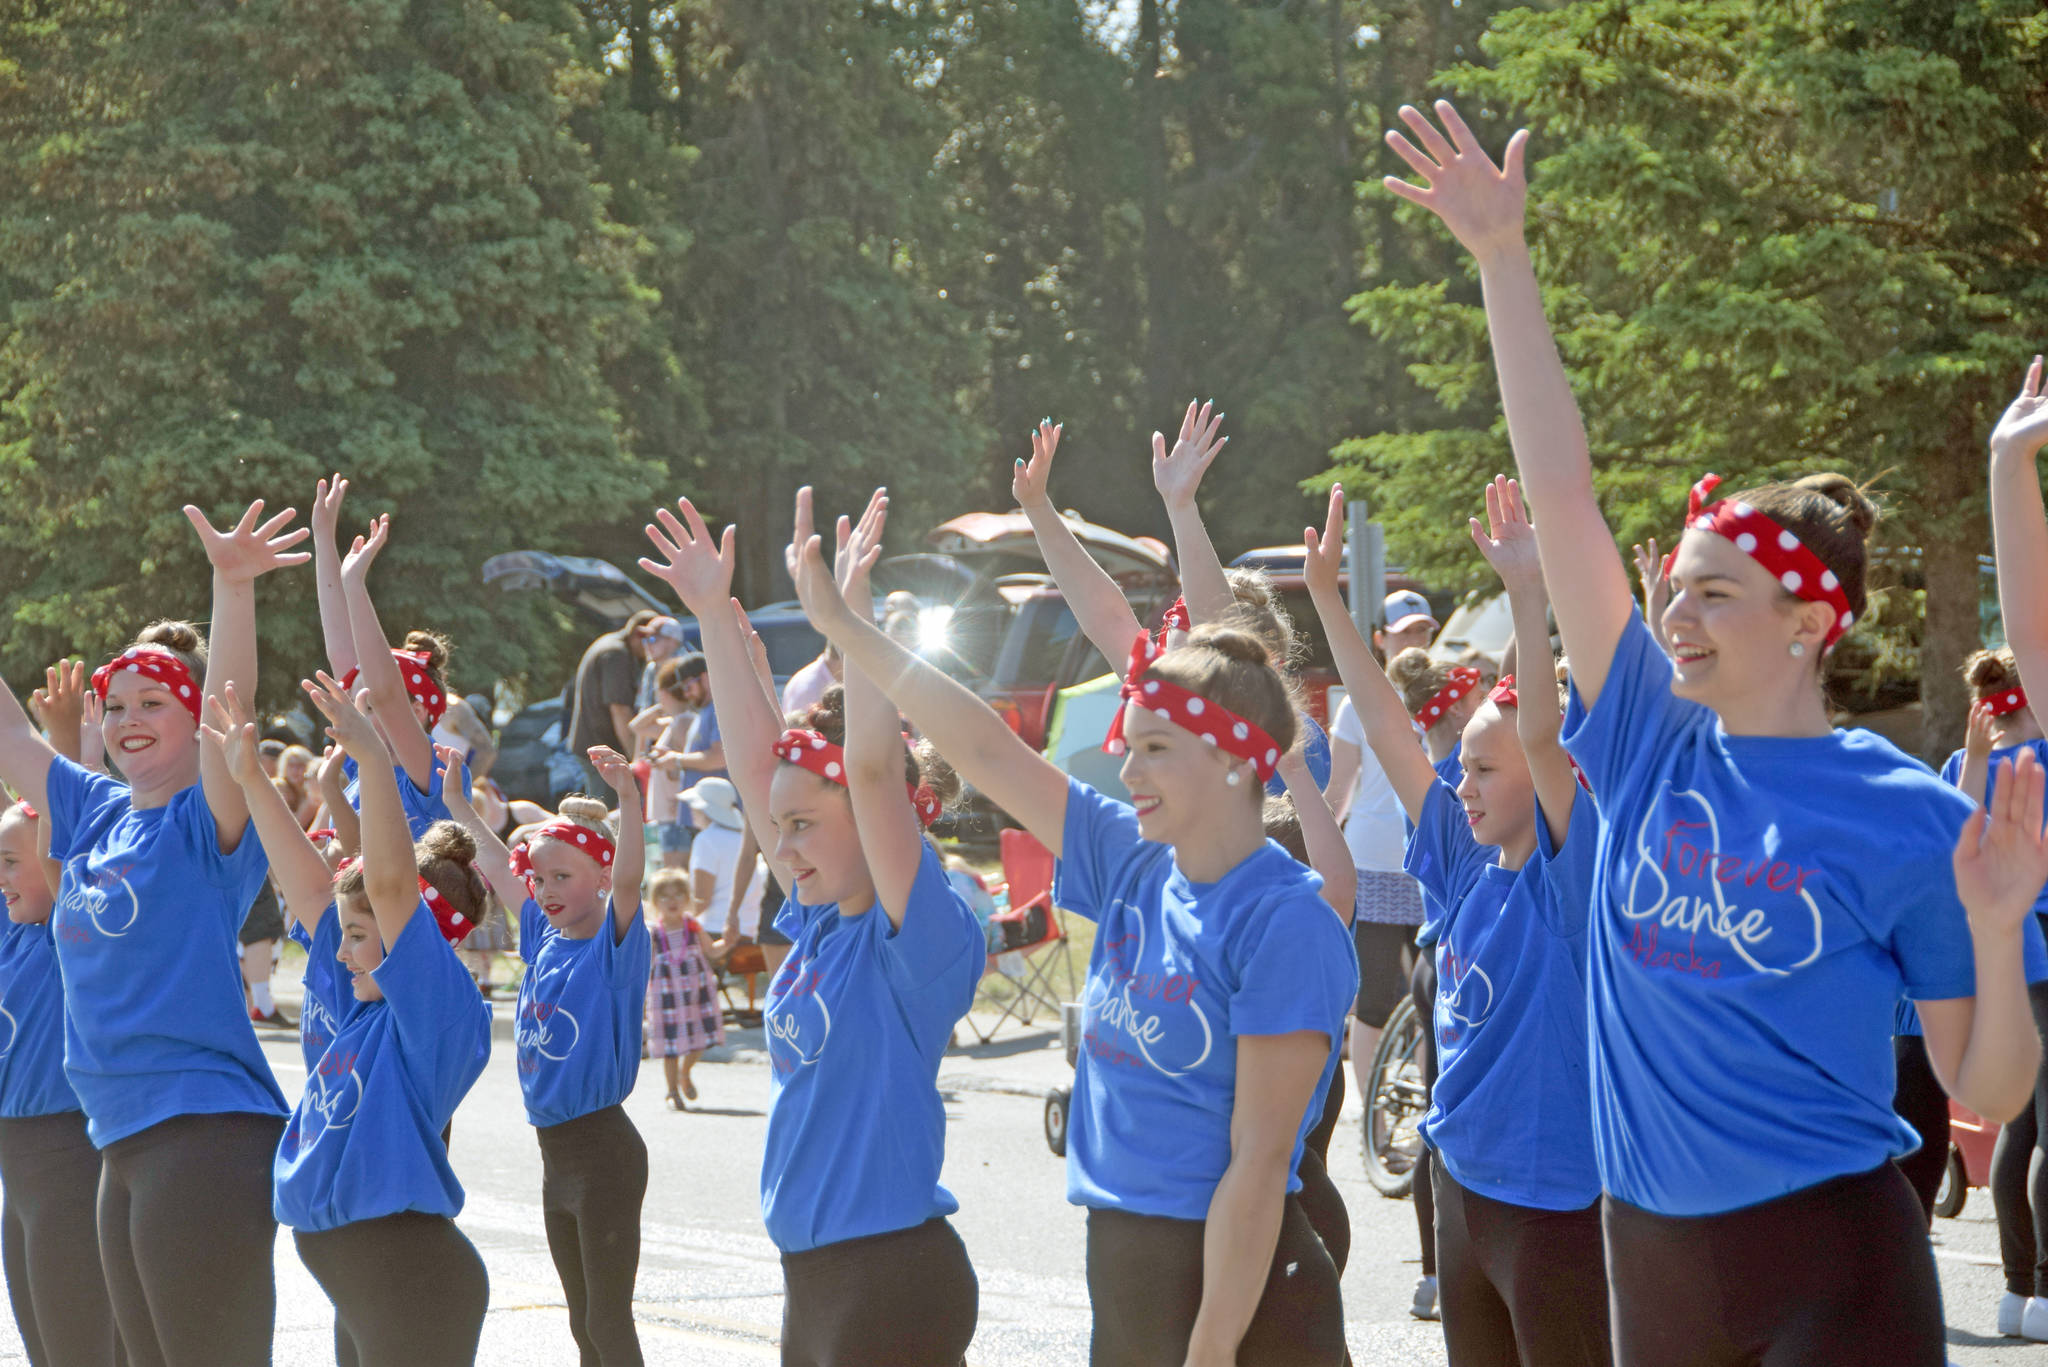 Forever Dance Alaska performs for the crowd during the 2019 July 4th parade in Kenai, Alaska. (Photo by Brian Mazurek/Peninsula Clarion)